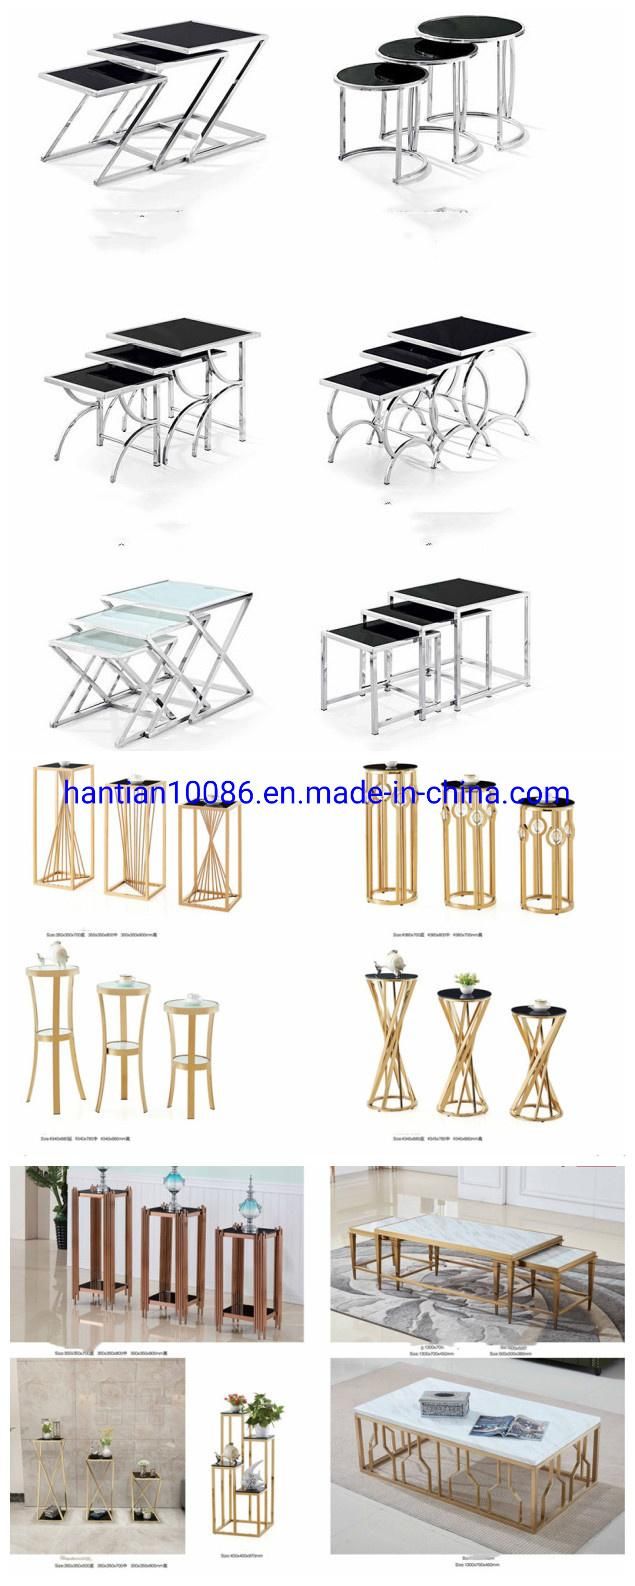 Combined Circle Table Kids Table Furniture Metal Table for Sale Side Table Set